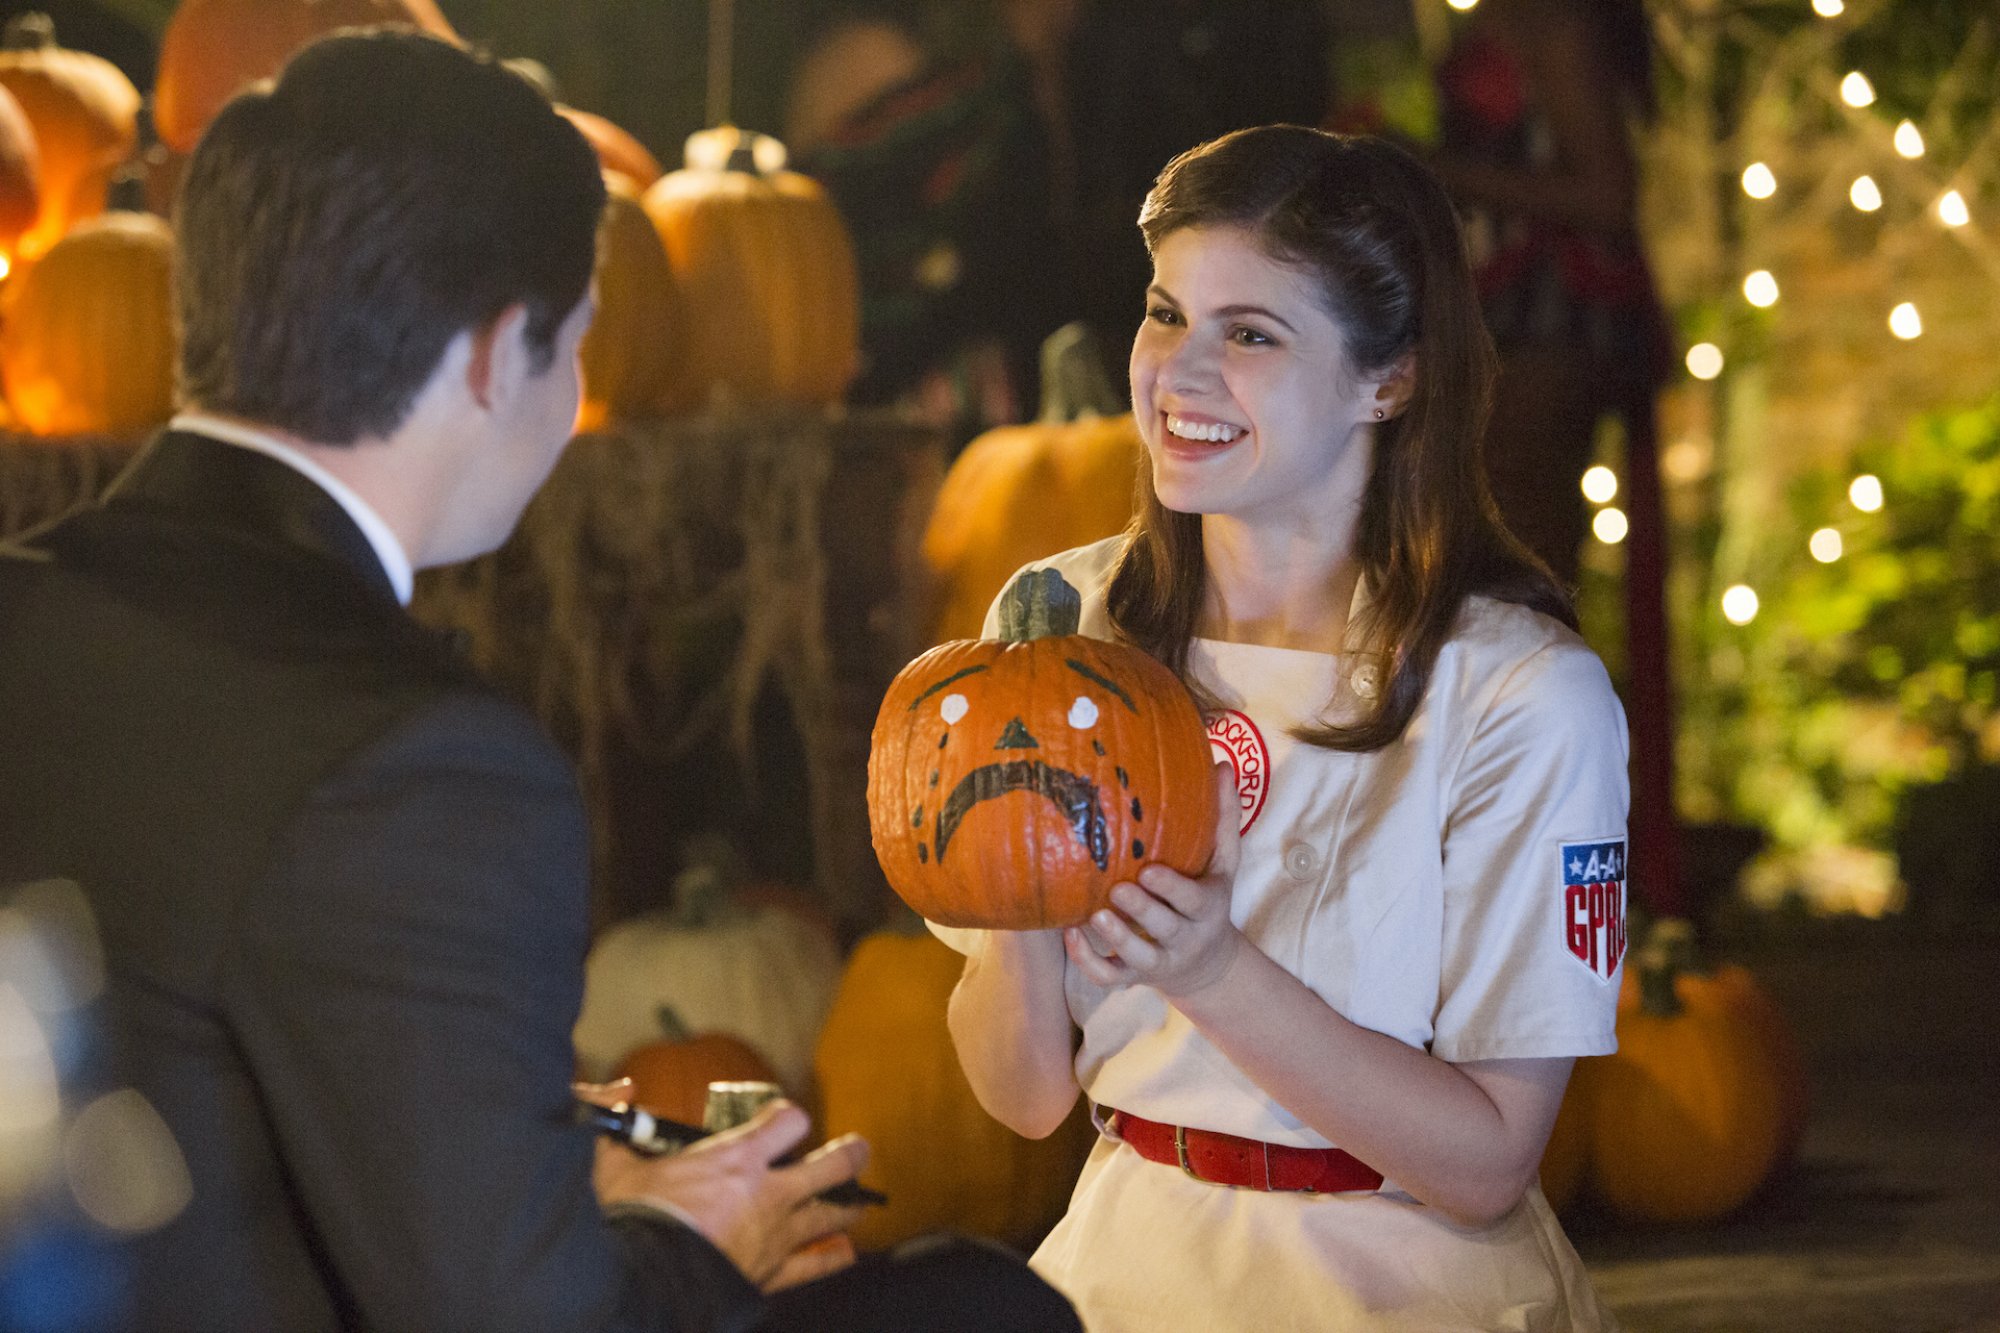 A scene from "When We First Met": A couple at a Halloween party